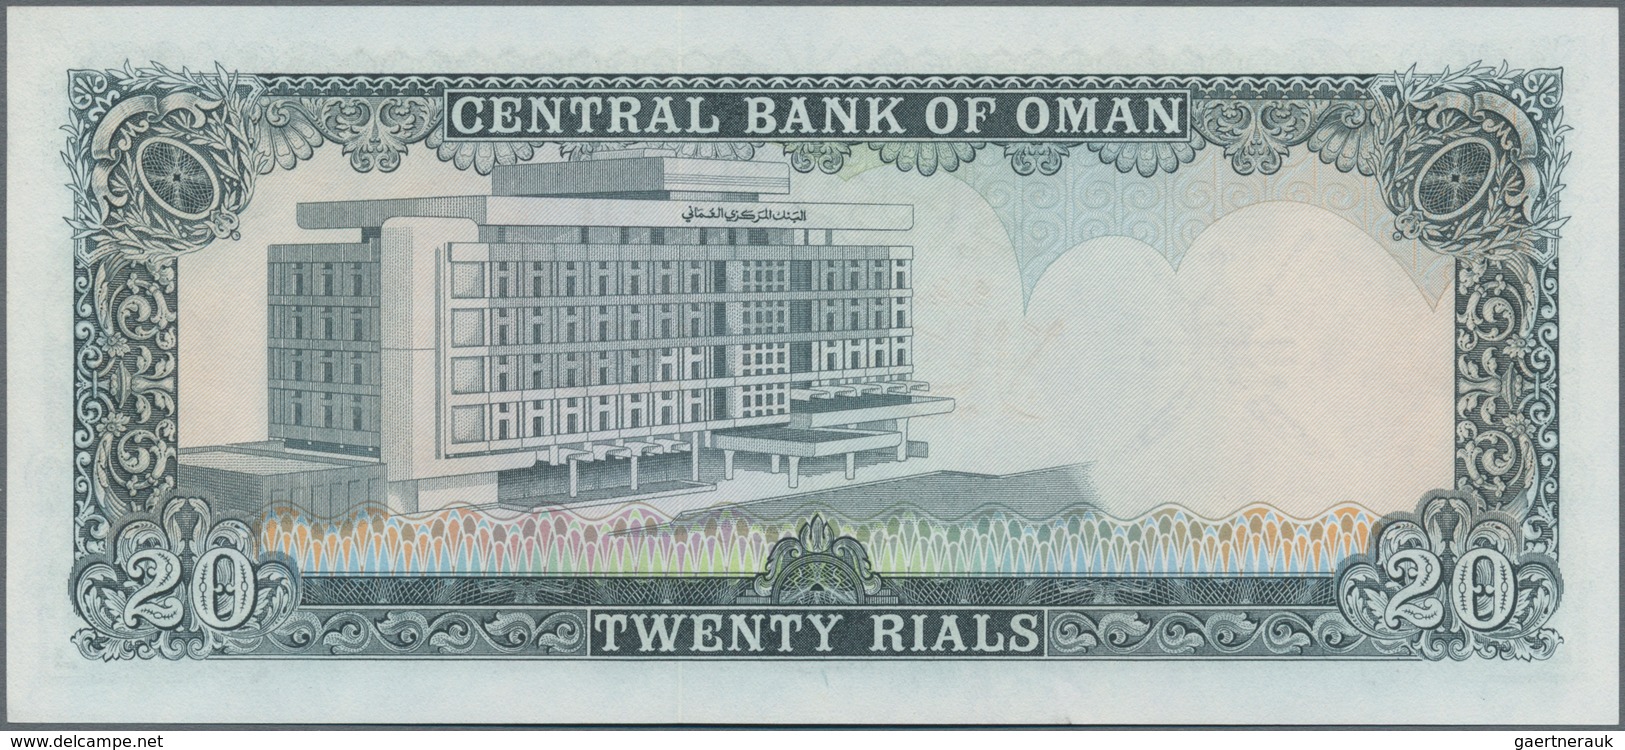 Oman: Central Bank Of Oman 20 Rials ND(1977), P.20 In Perfect UNC Condition. - Oman